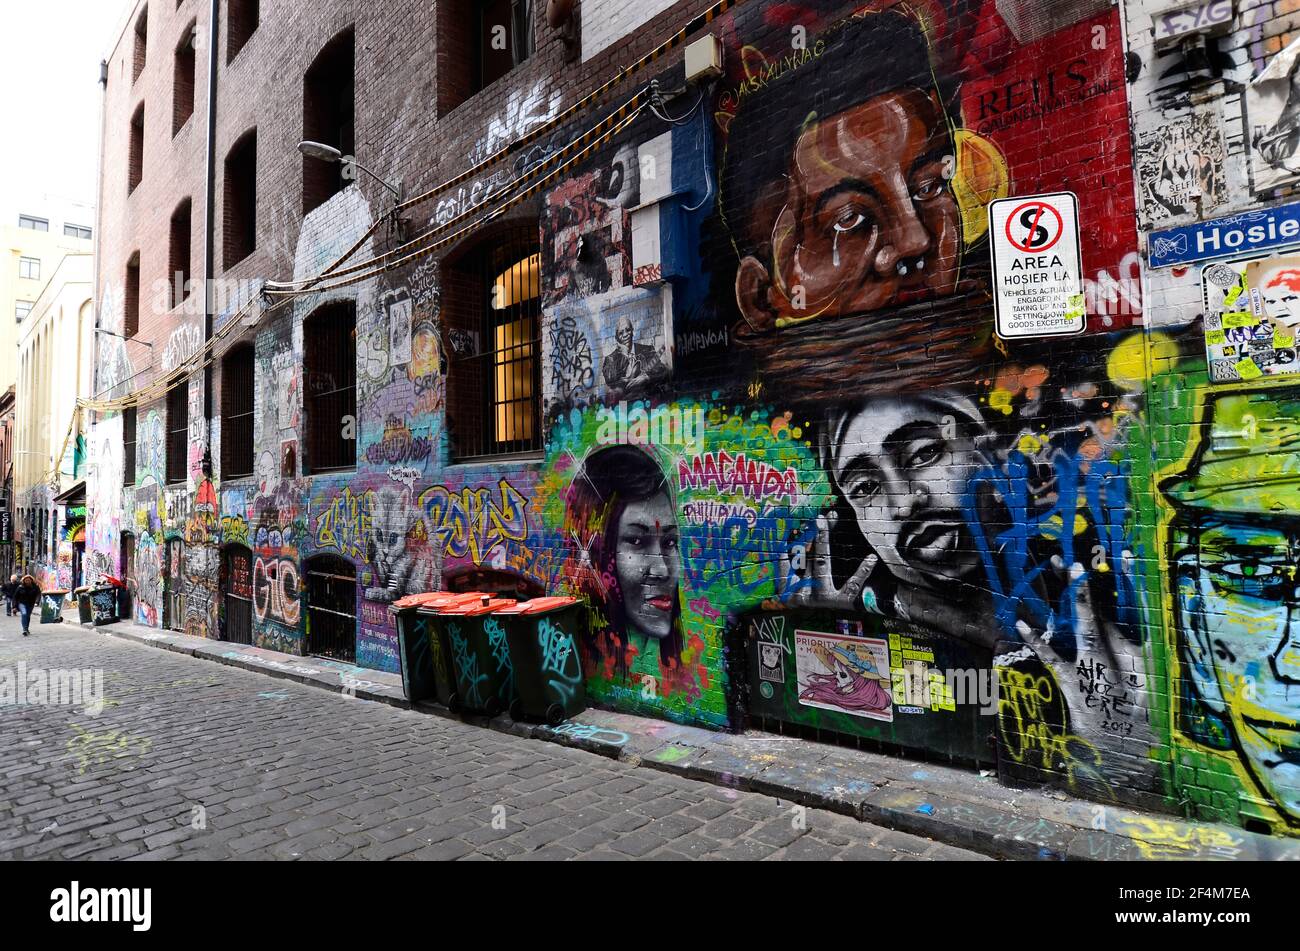 Melbourne, VIC, Australia - November 05, 2017: Buildings and walls in Hosier Lane full with painted graffiti Stock Photo